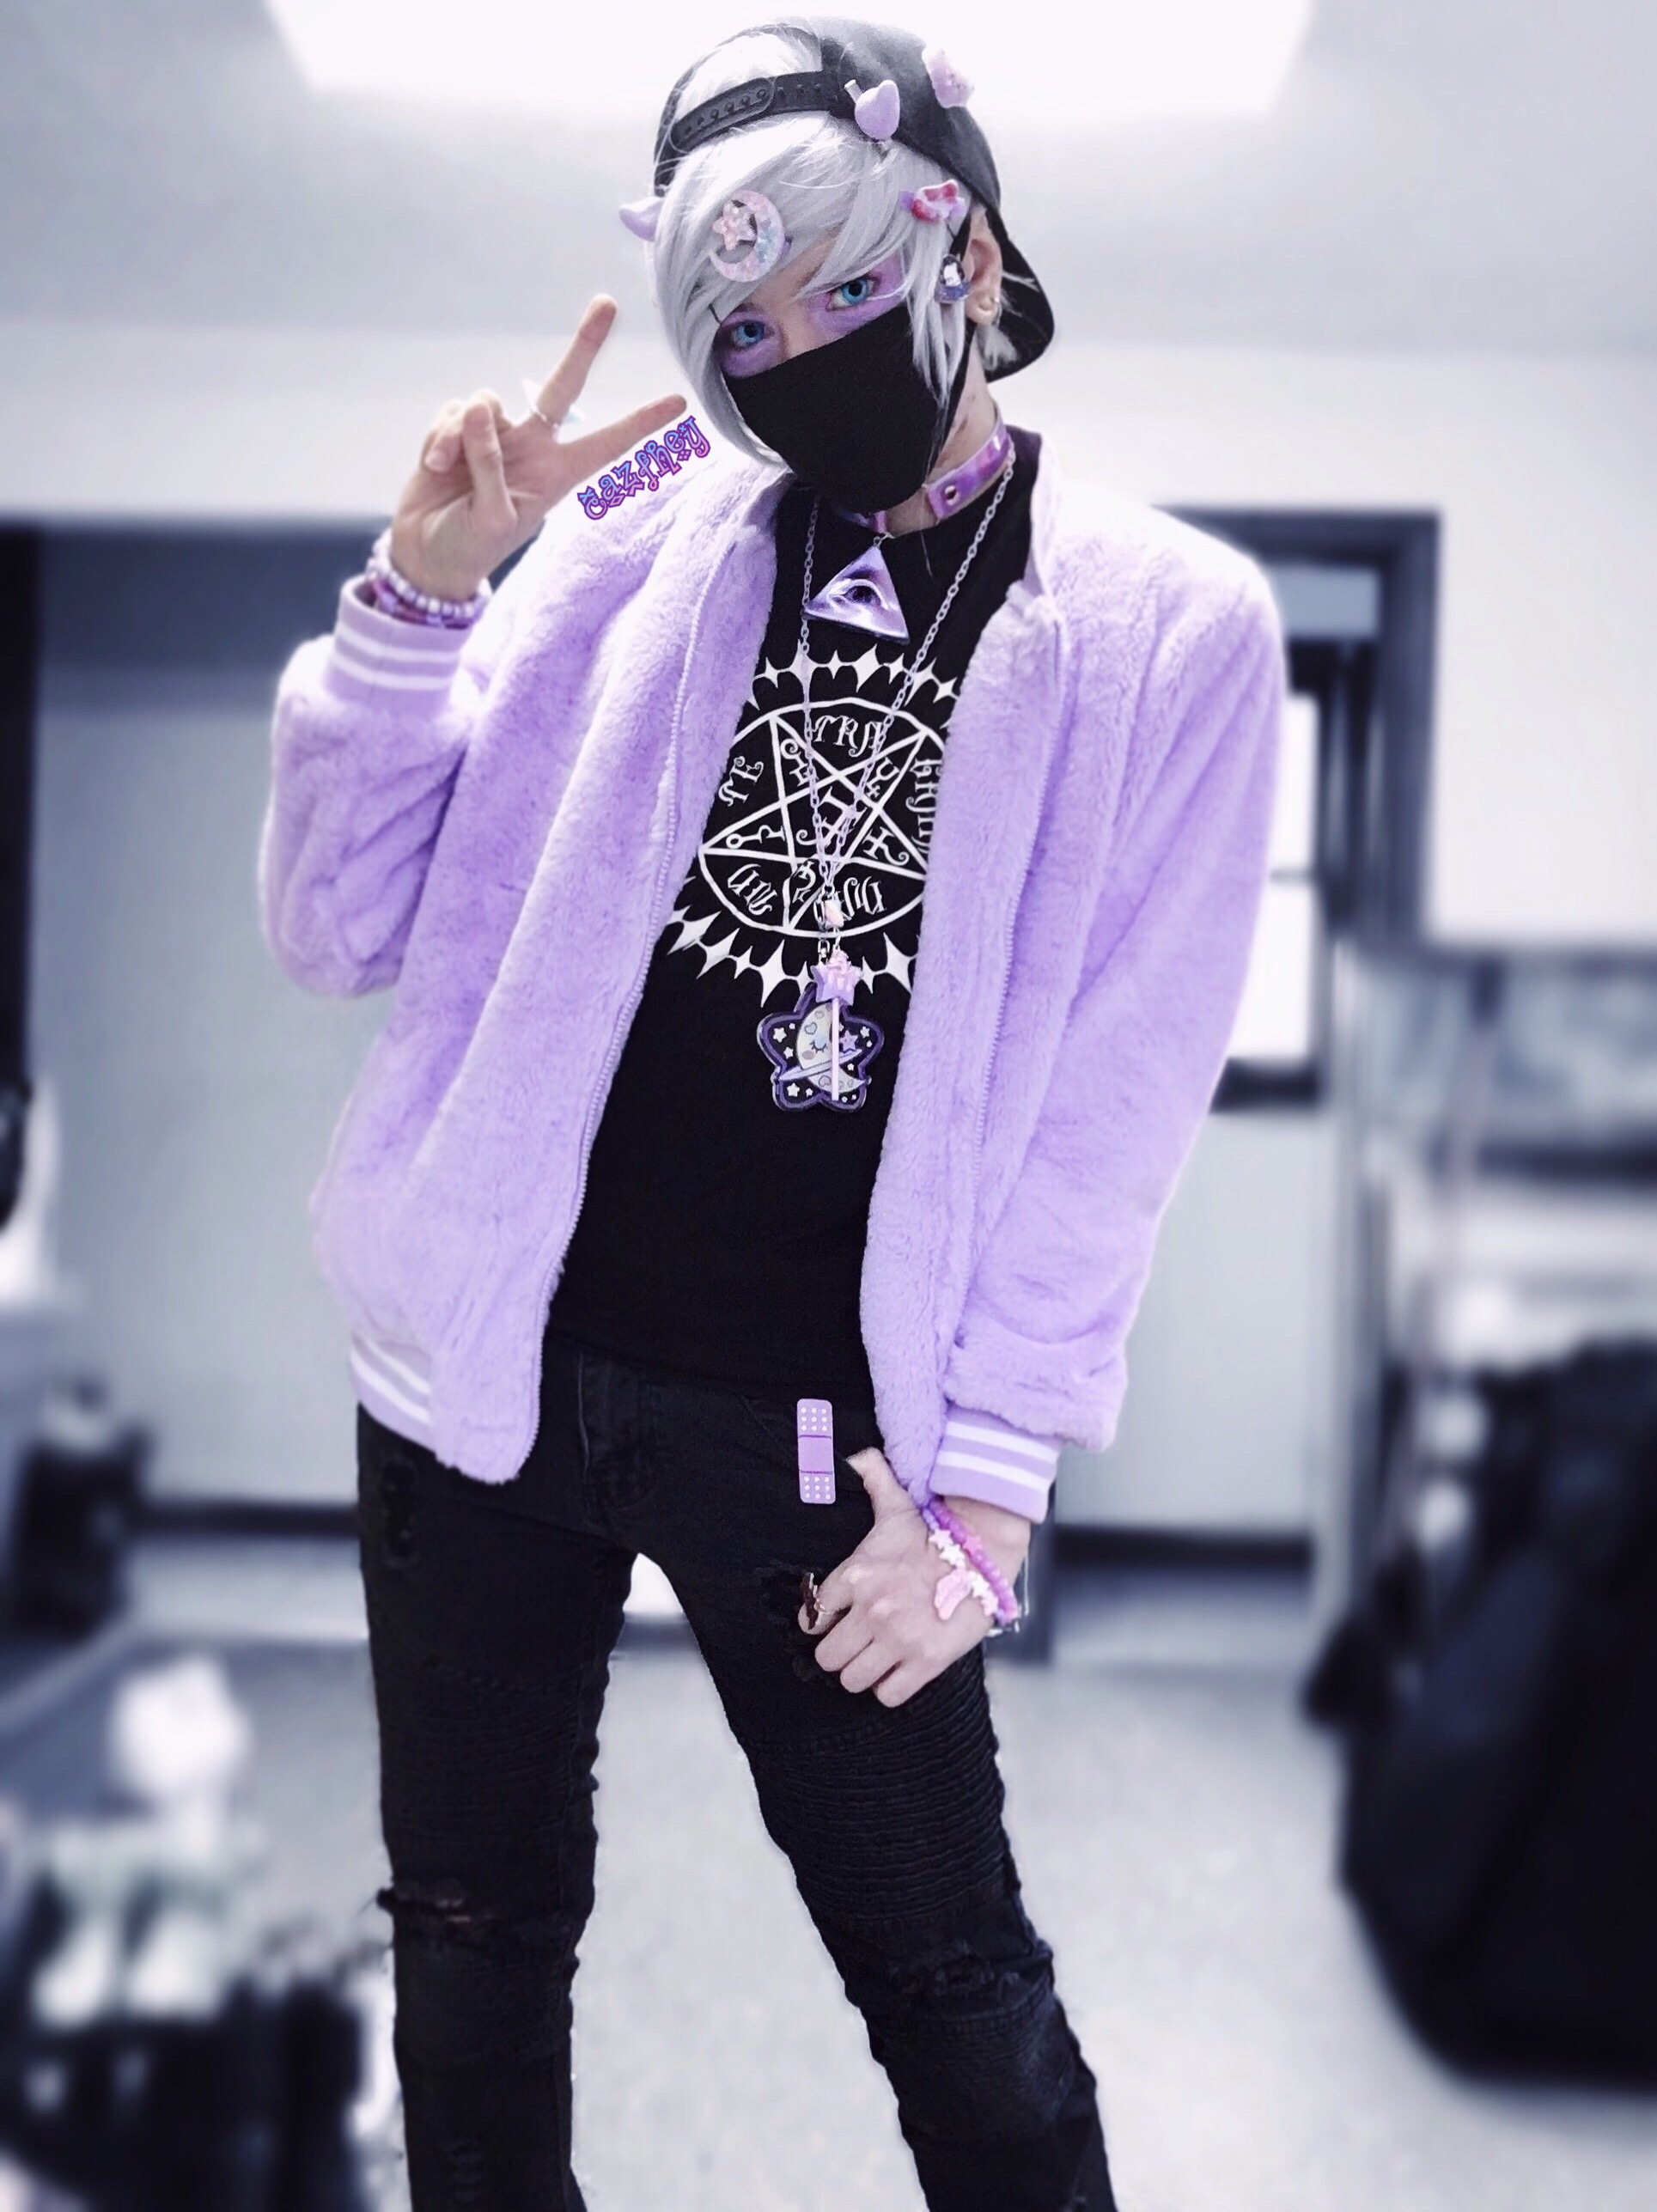 7 KAWAII OUTFITS ideas  pastel goth outfits, goth outfits, outfits